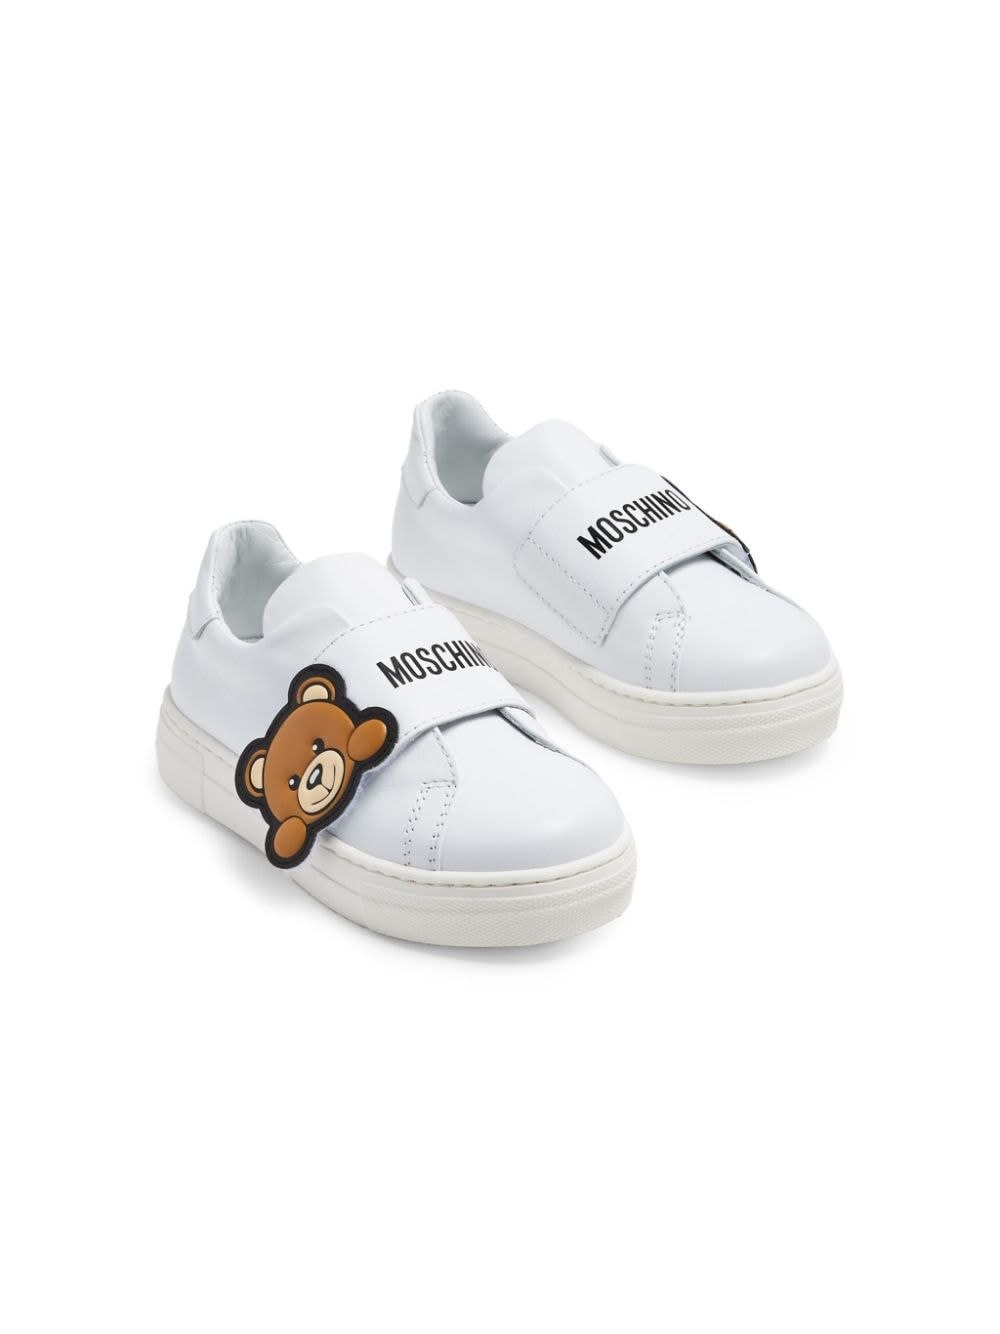 MOSCHINO TEDDY BEAR SNEAKERS WITH TEAR